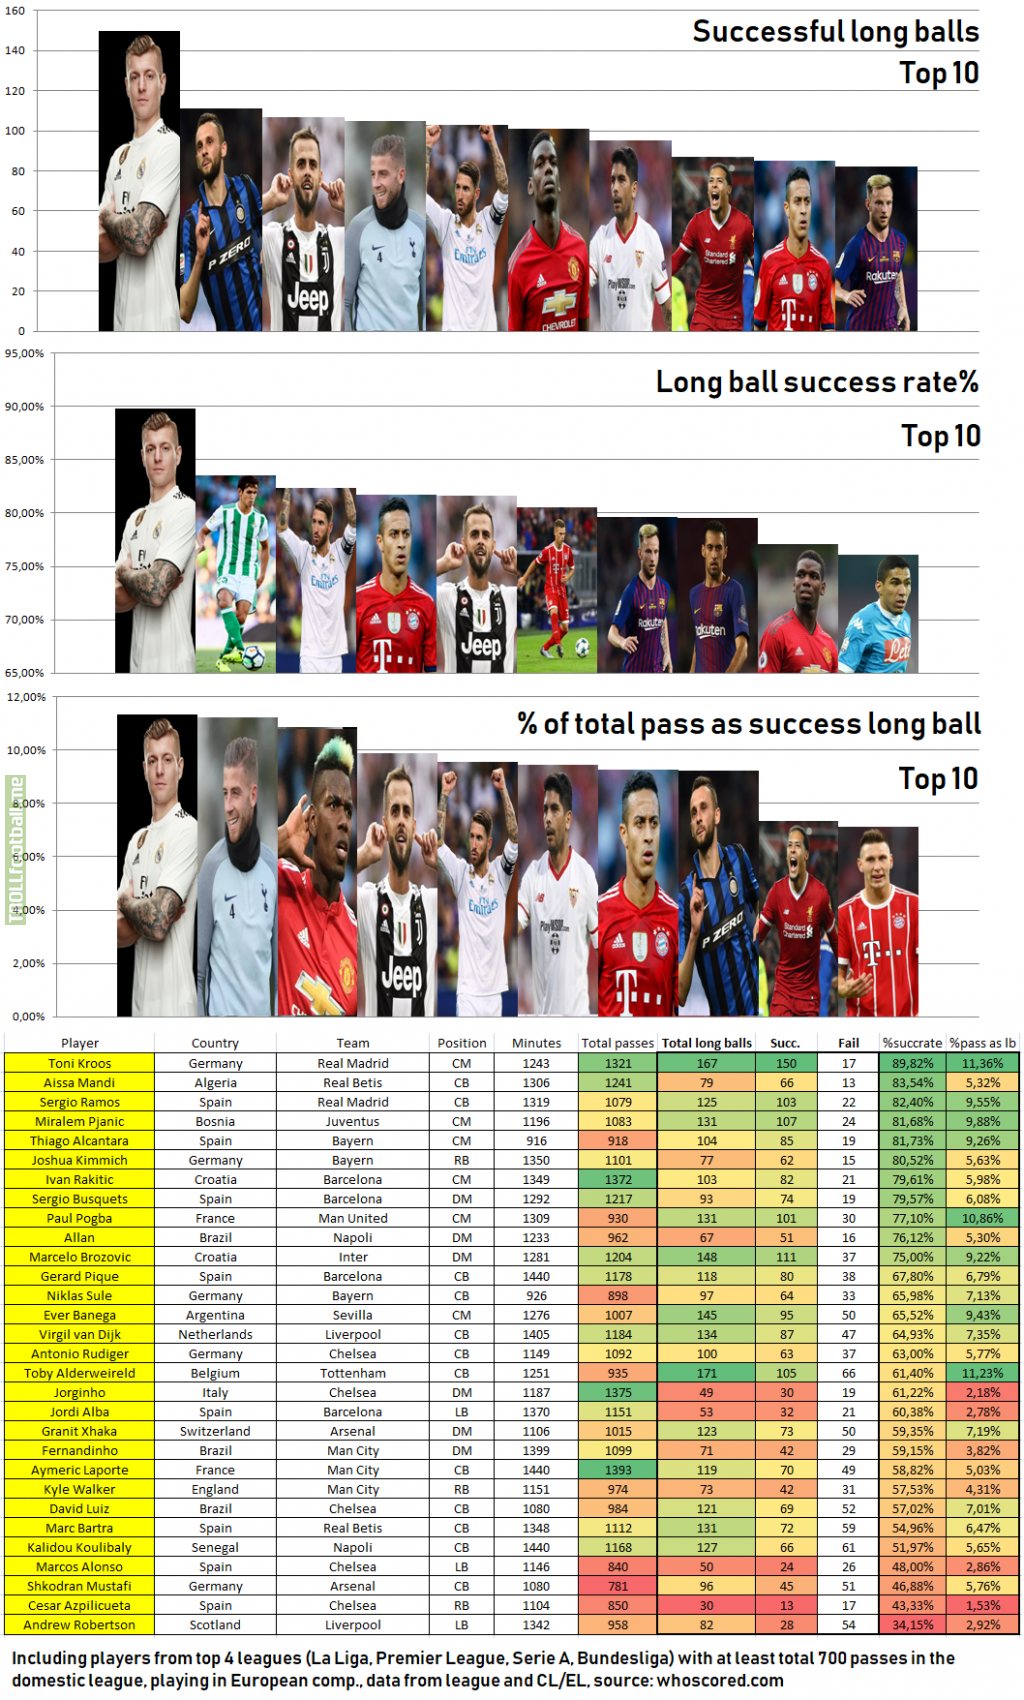 Amazing stats about Toni Kroos long ball passing [OC]